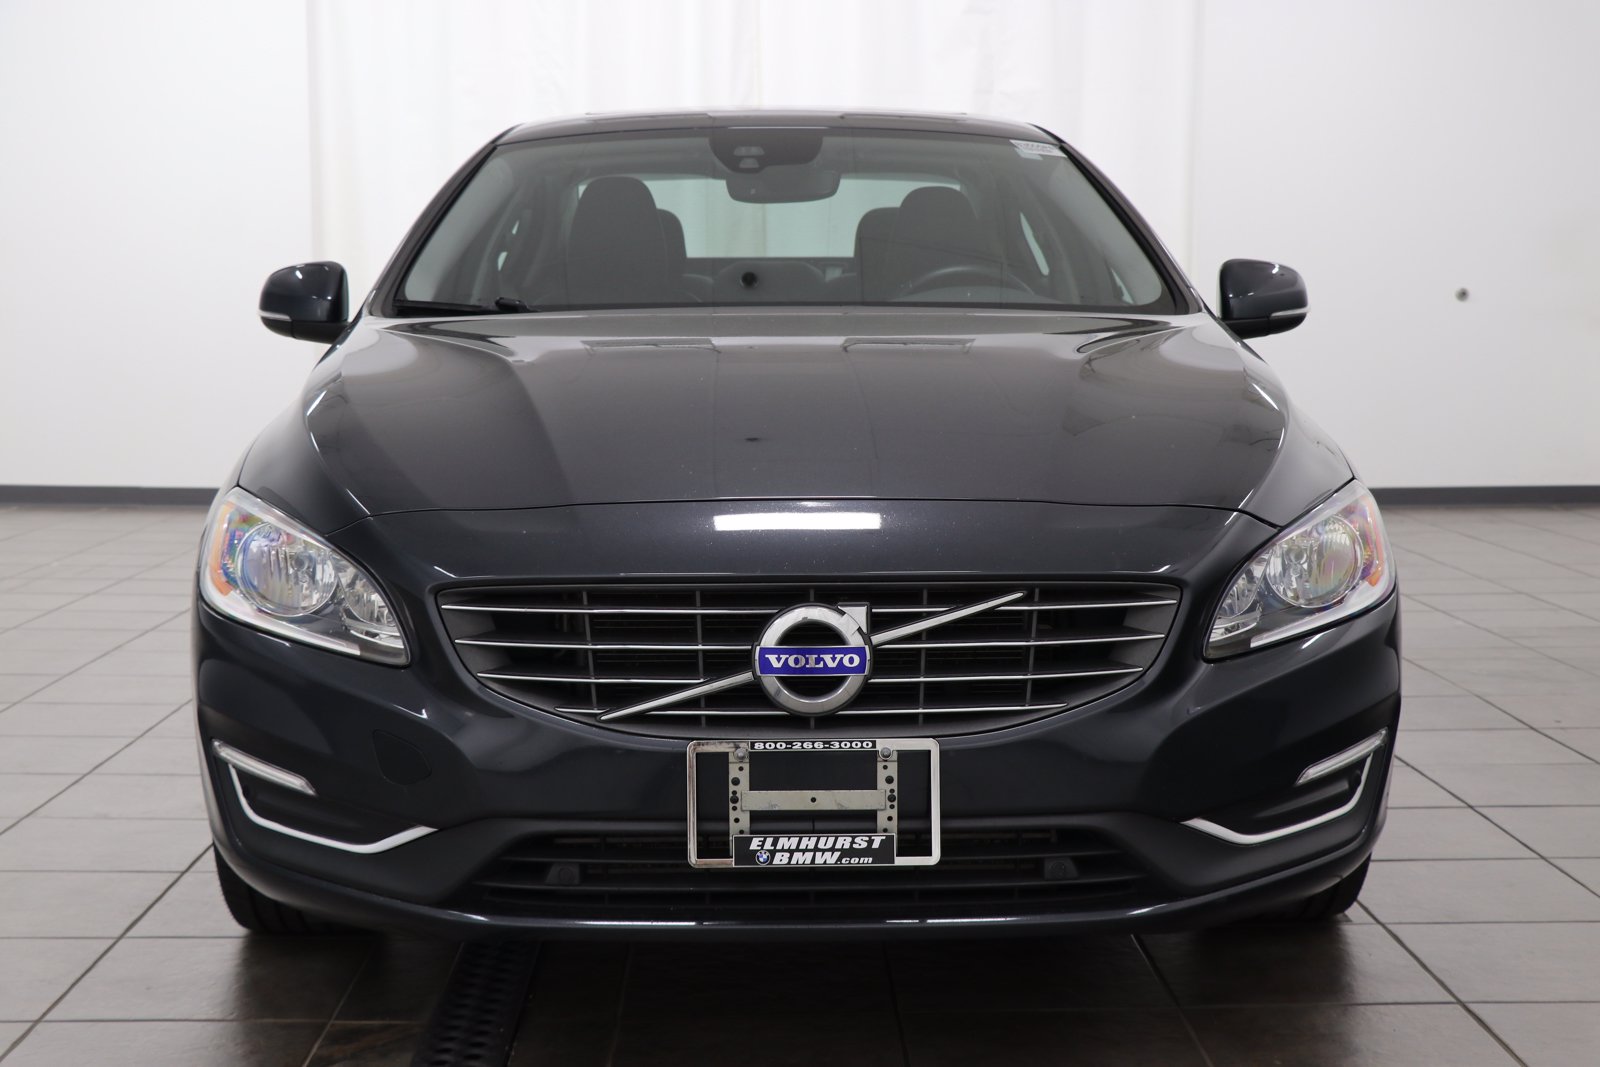 PreOwned 2016 Volvo S60 T5 DriveE Premier 4dr Car in